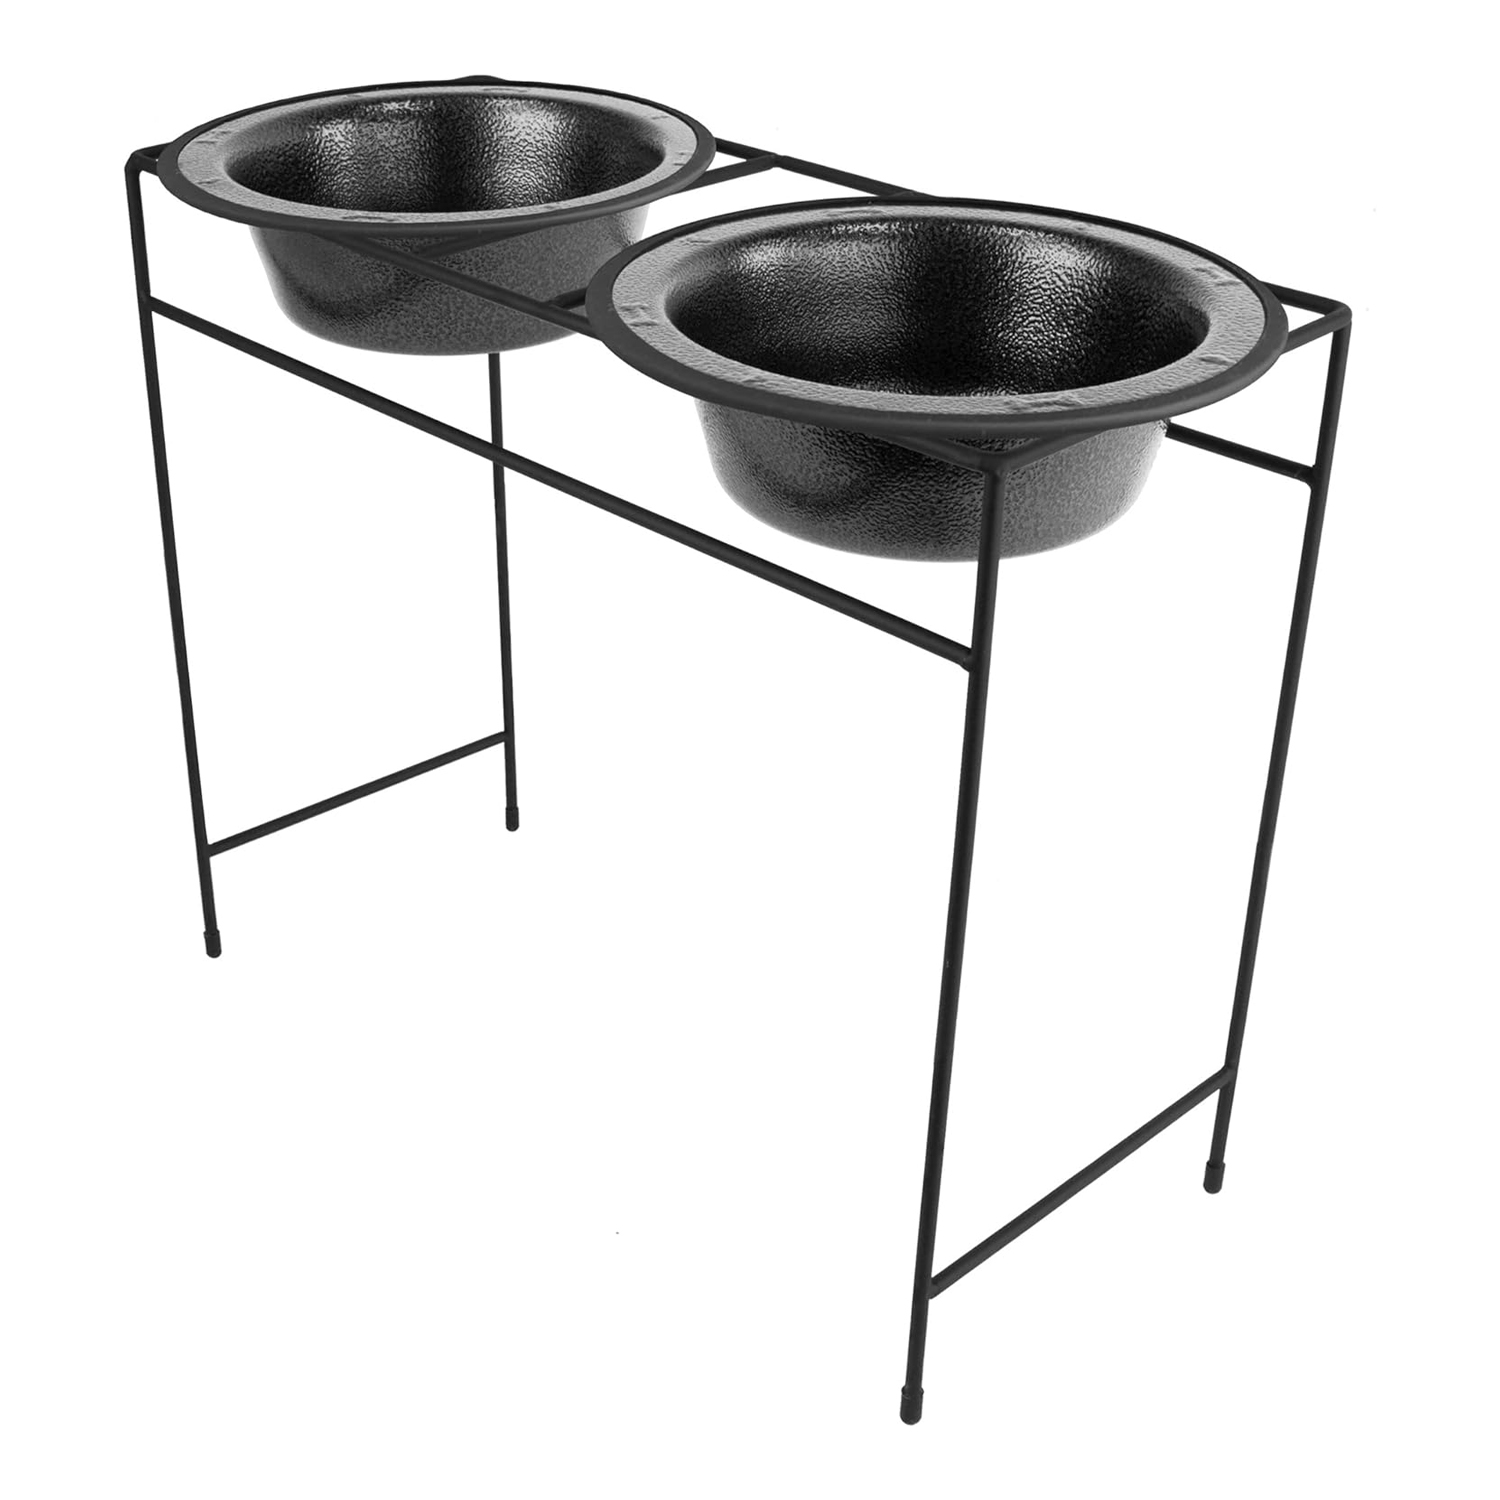 Platinum Pets Modern Double Diner Feeder with Stainless Steel Bowls